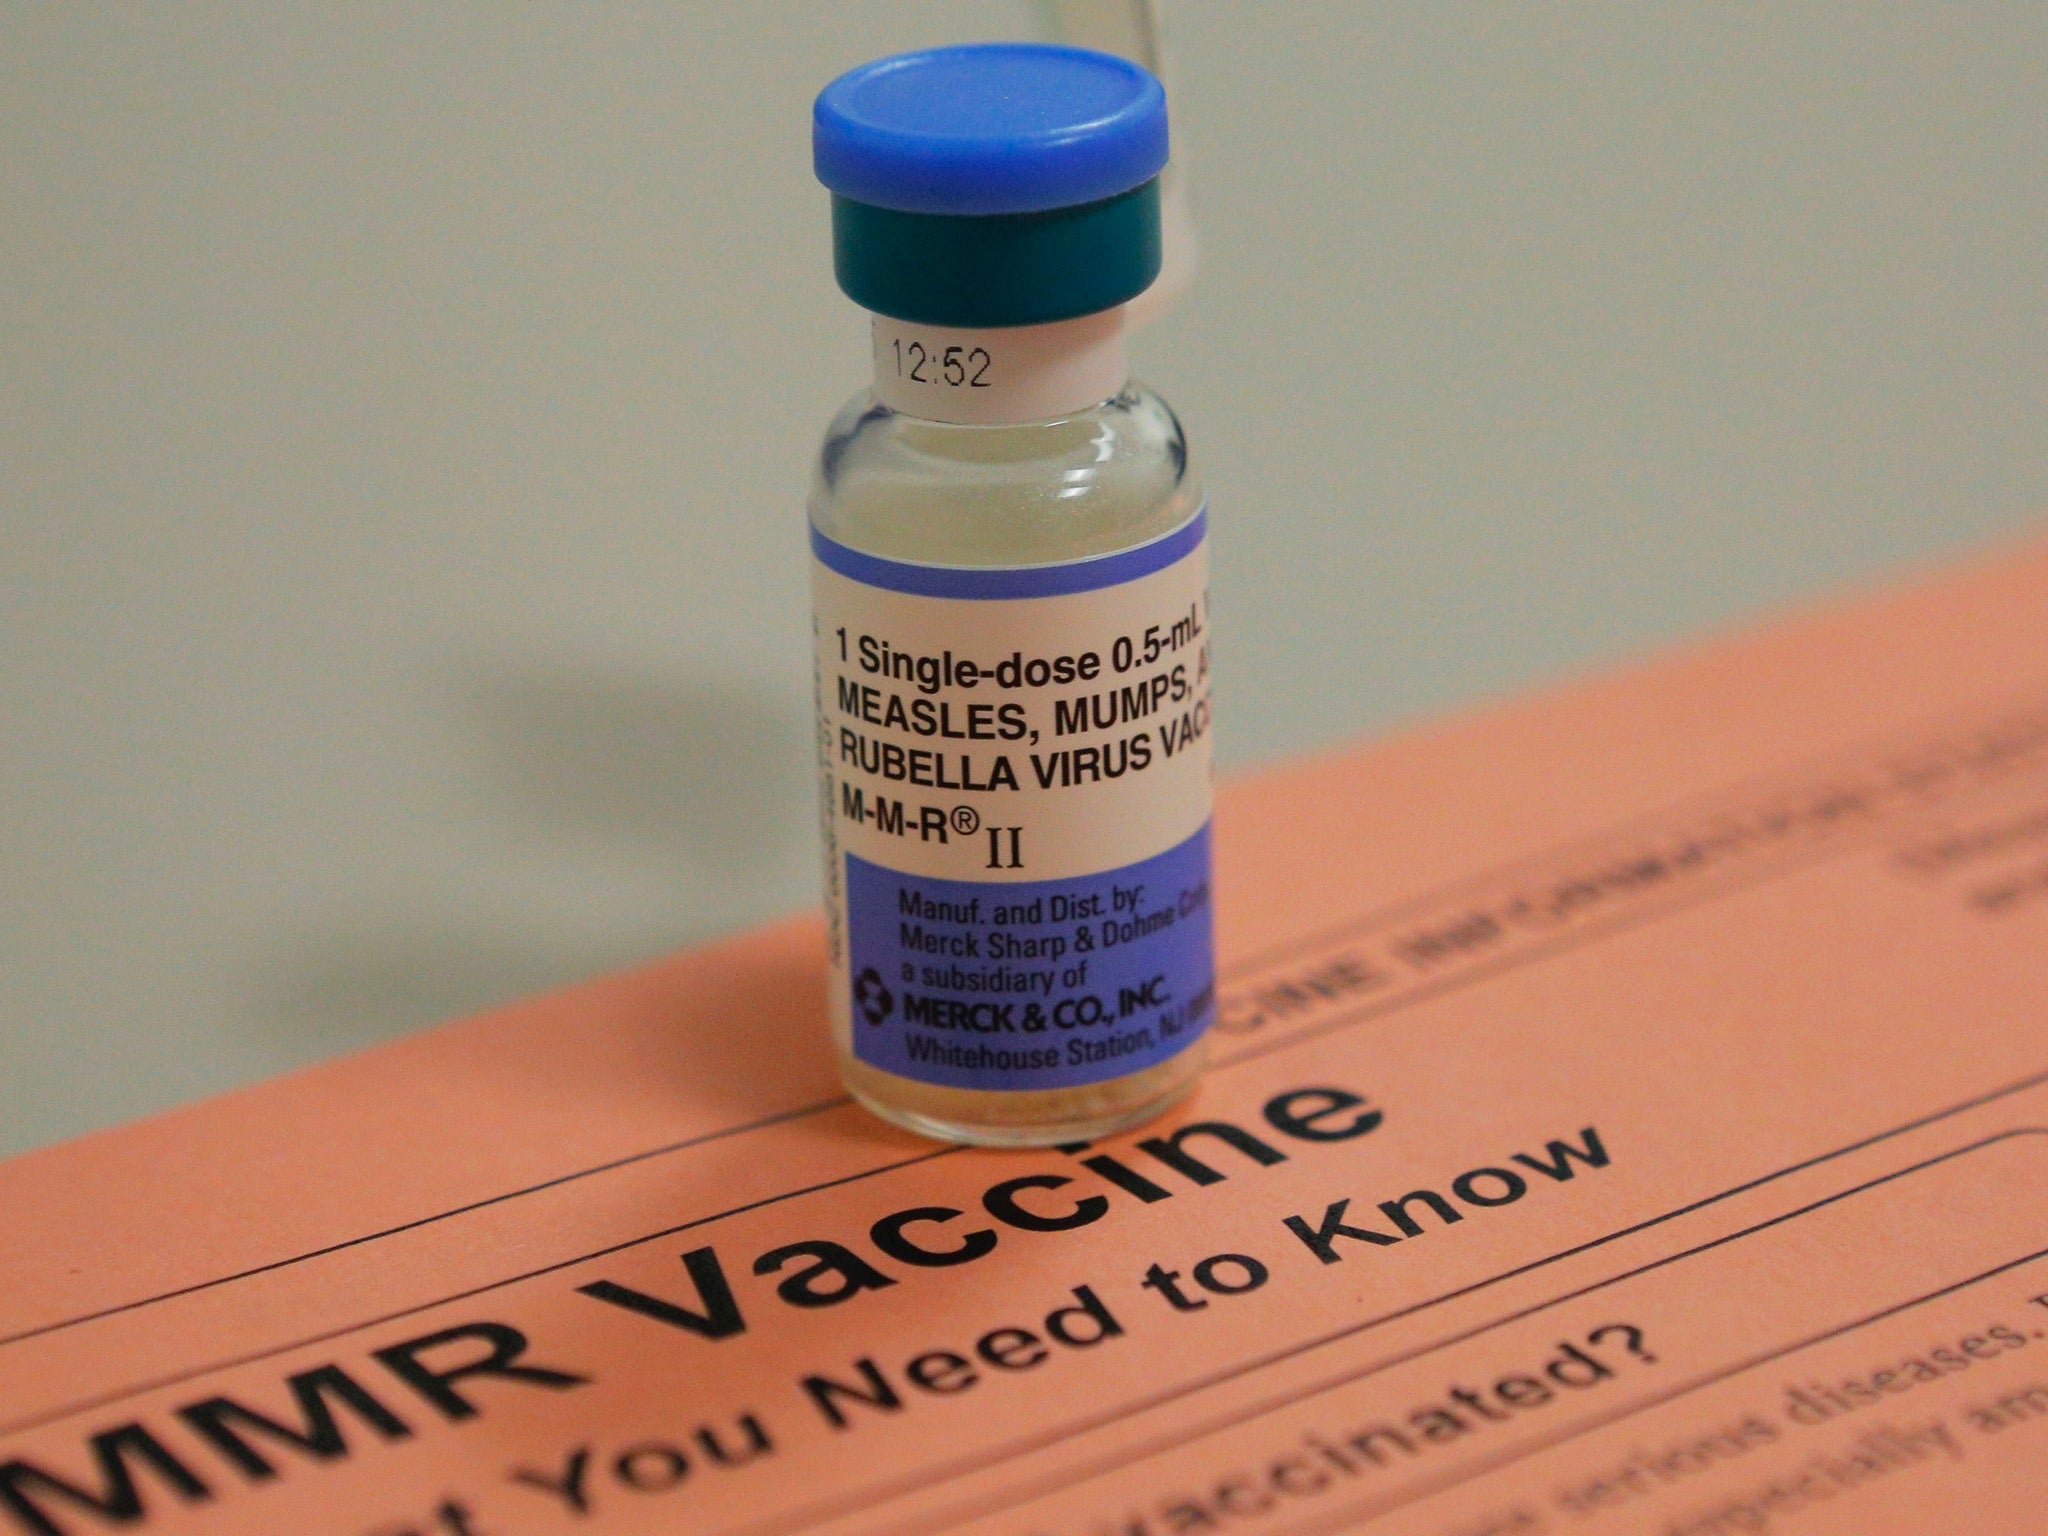 The combined measles, mumps and rubella